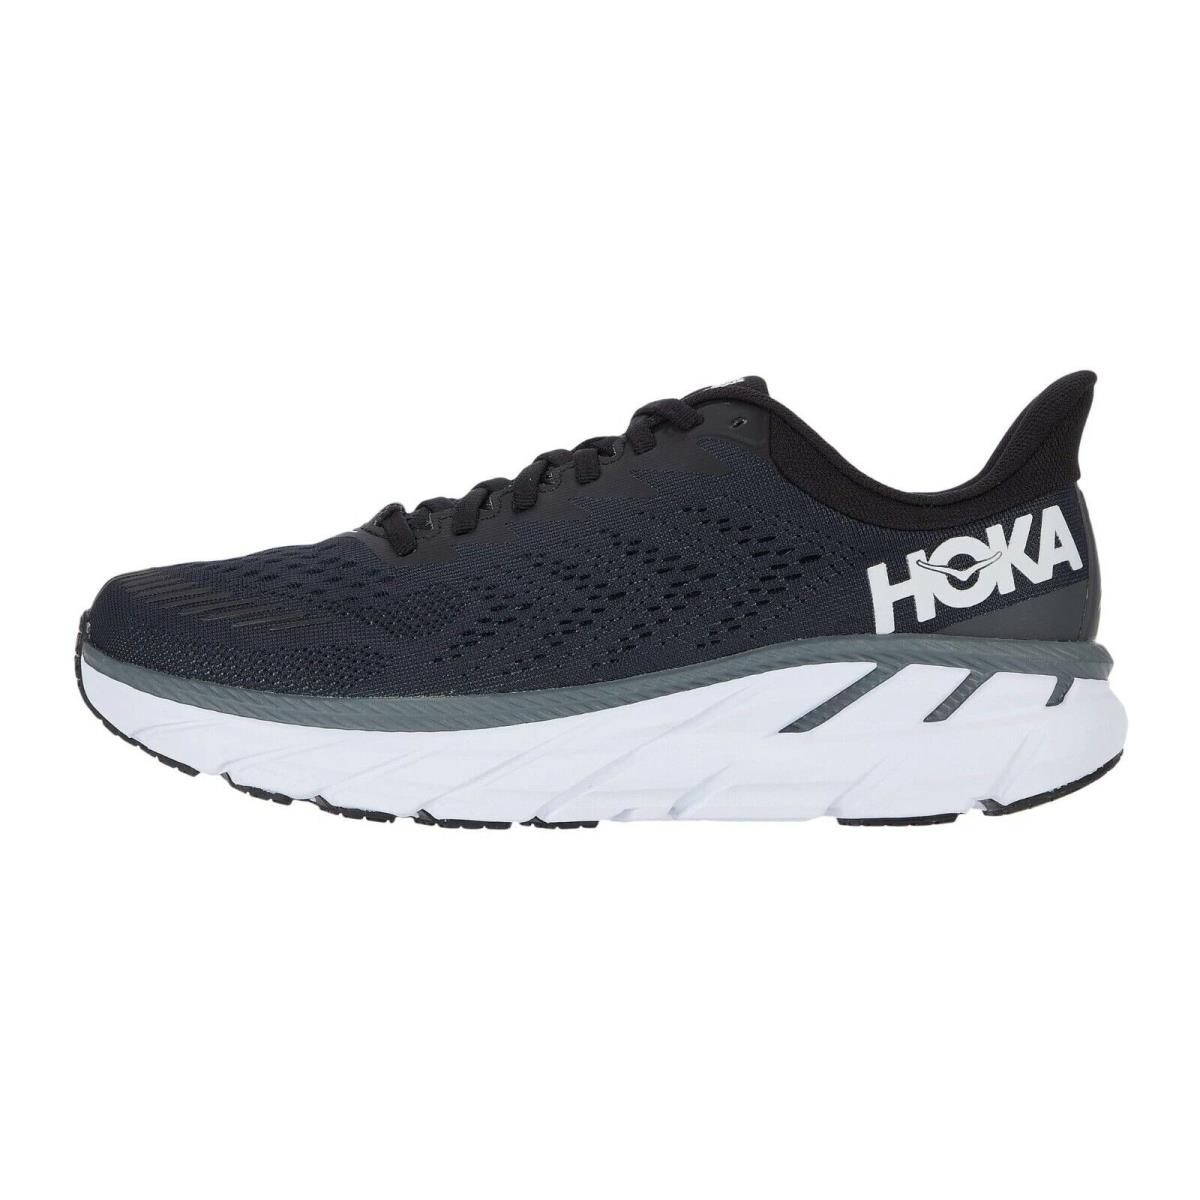 Hoka One One Clifton 7 Men`s Lightweight Lace-up Sneakers Black White Size 8.5